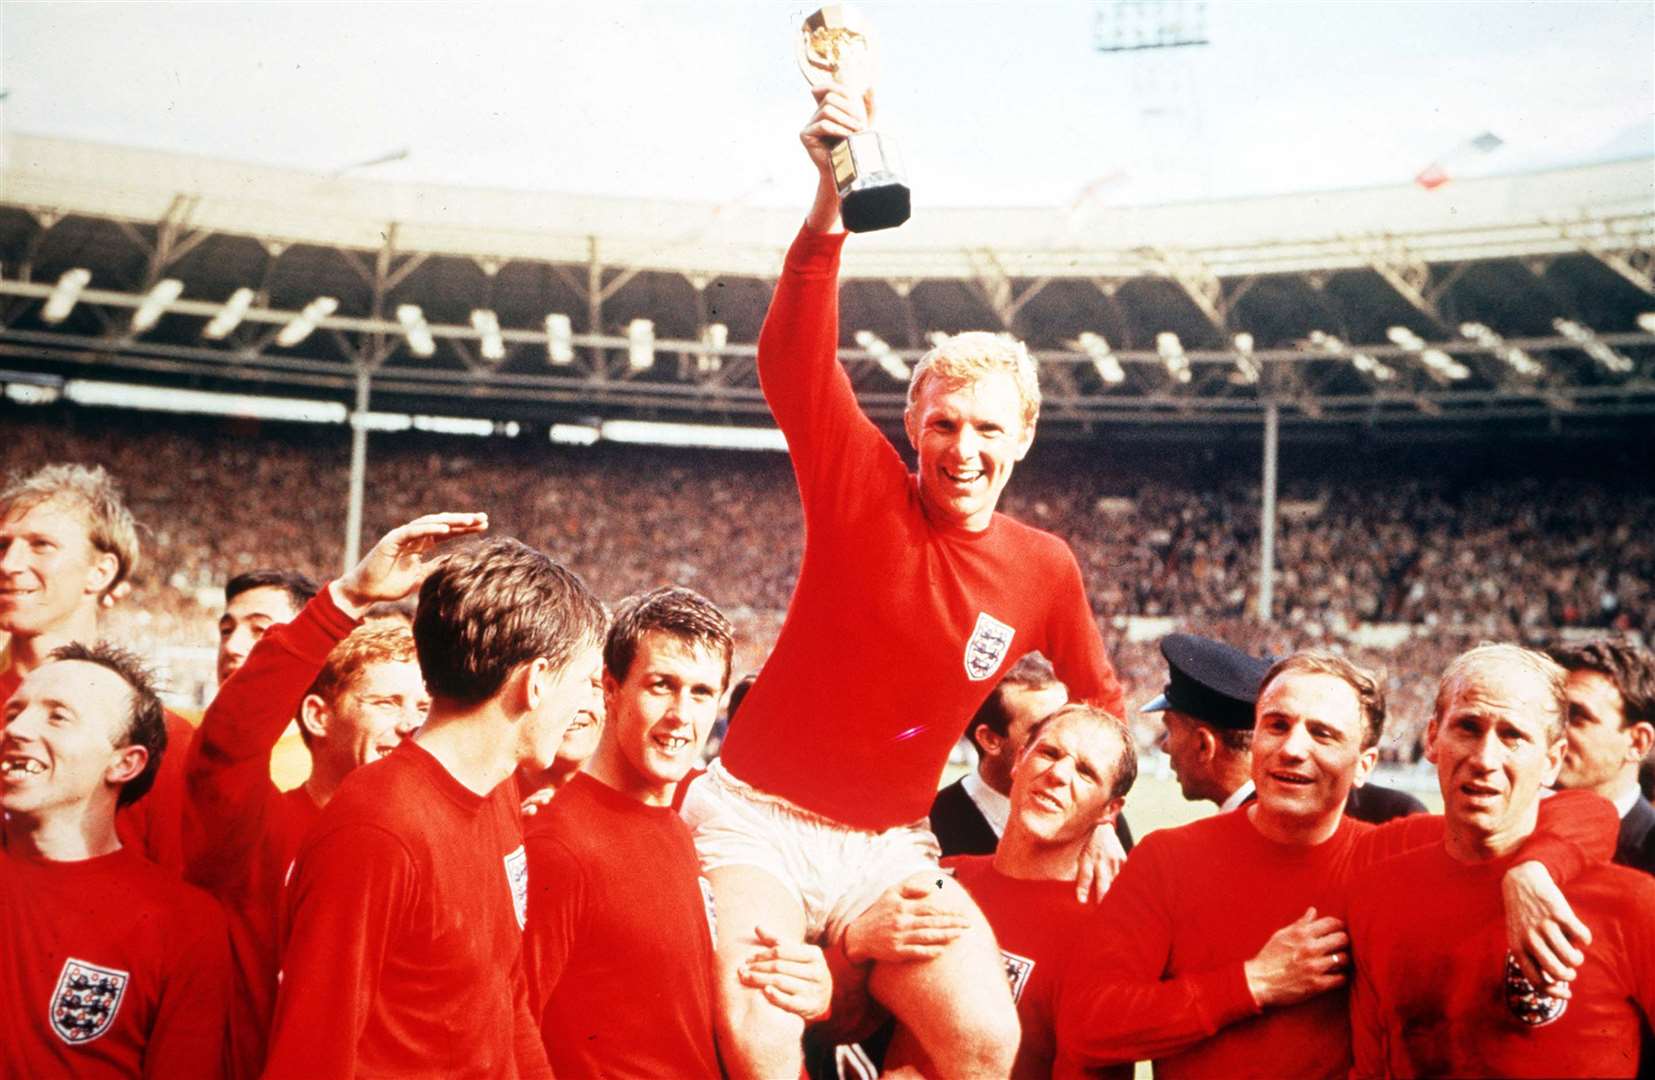 Victory in 1966: England captain Bobby Moore holds raises trophy as he sits on the shoulders of his team-mates, from left to right: Jack Charlton, Nobby Stiles, Gordon Banks (behind), Alan Ball, Martin Peters, Geoff Hurst, Bobby Moore, Ray Wilson, George Cohen and Bobby Charlton. Photo by Popperfoto